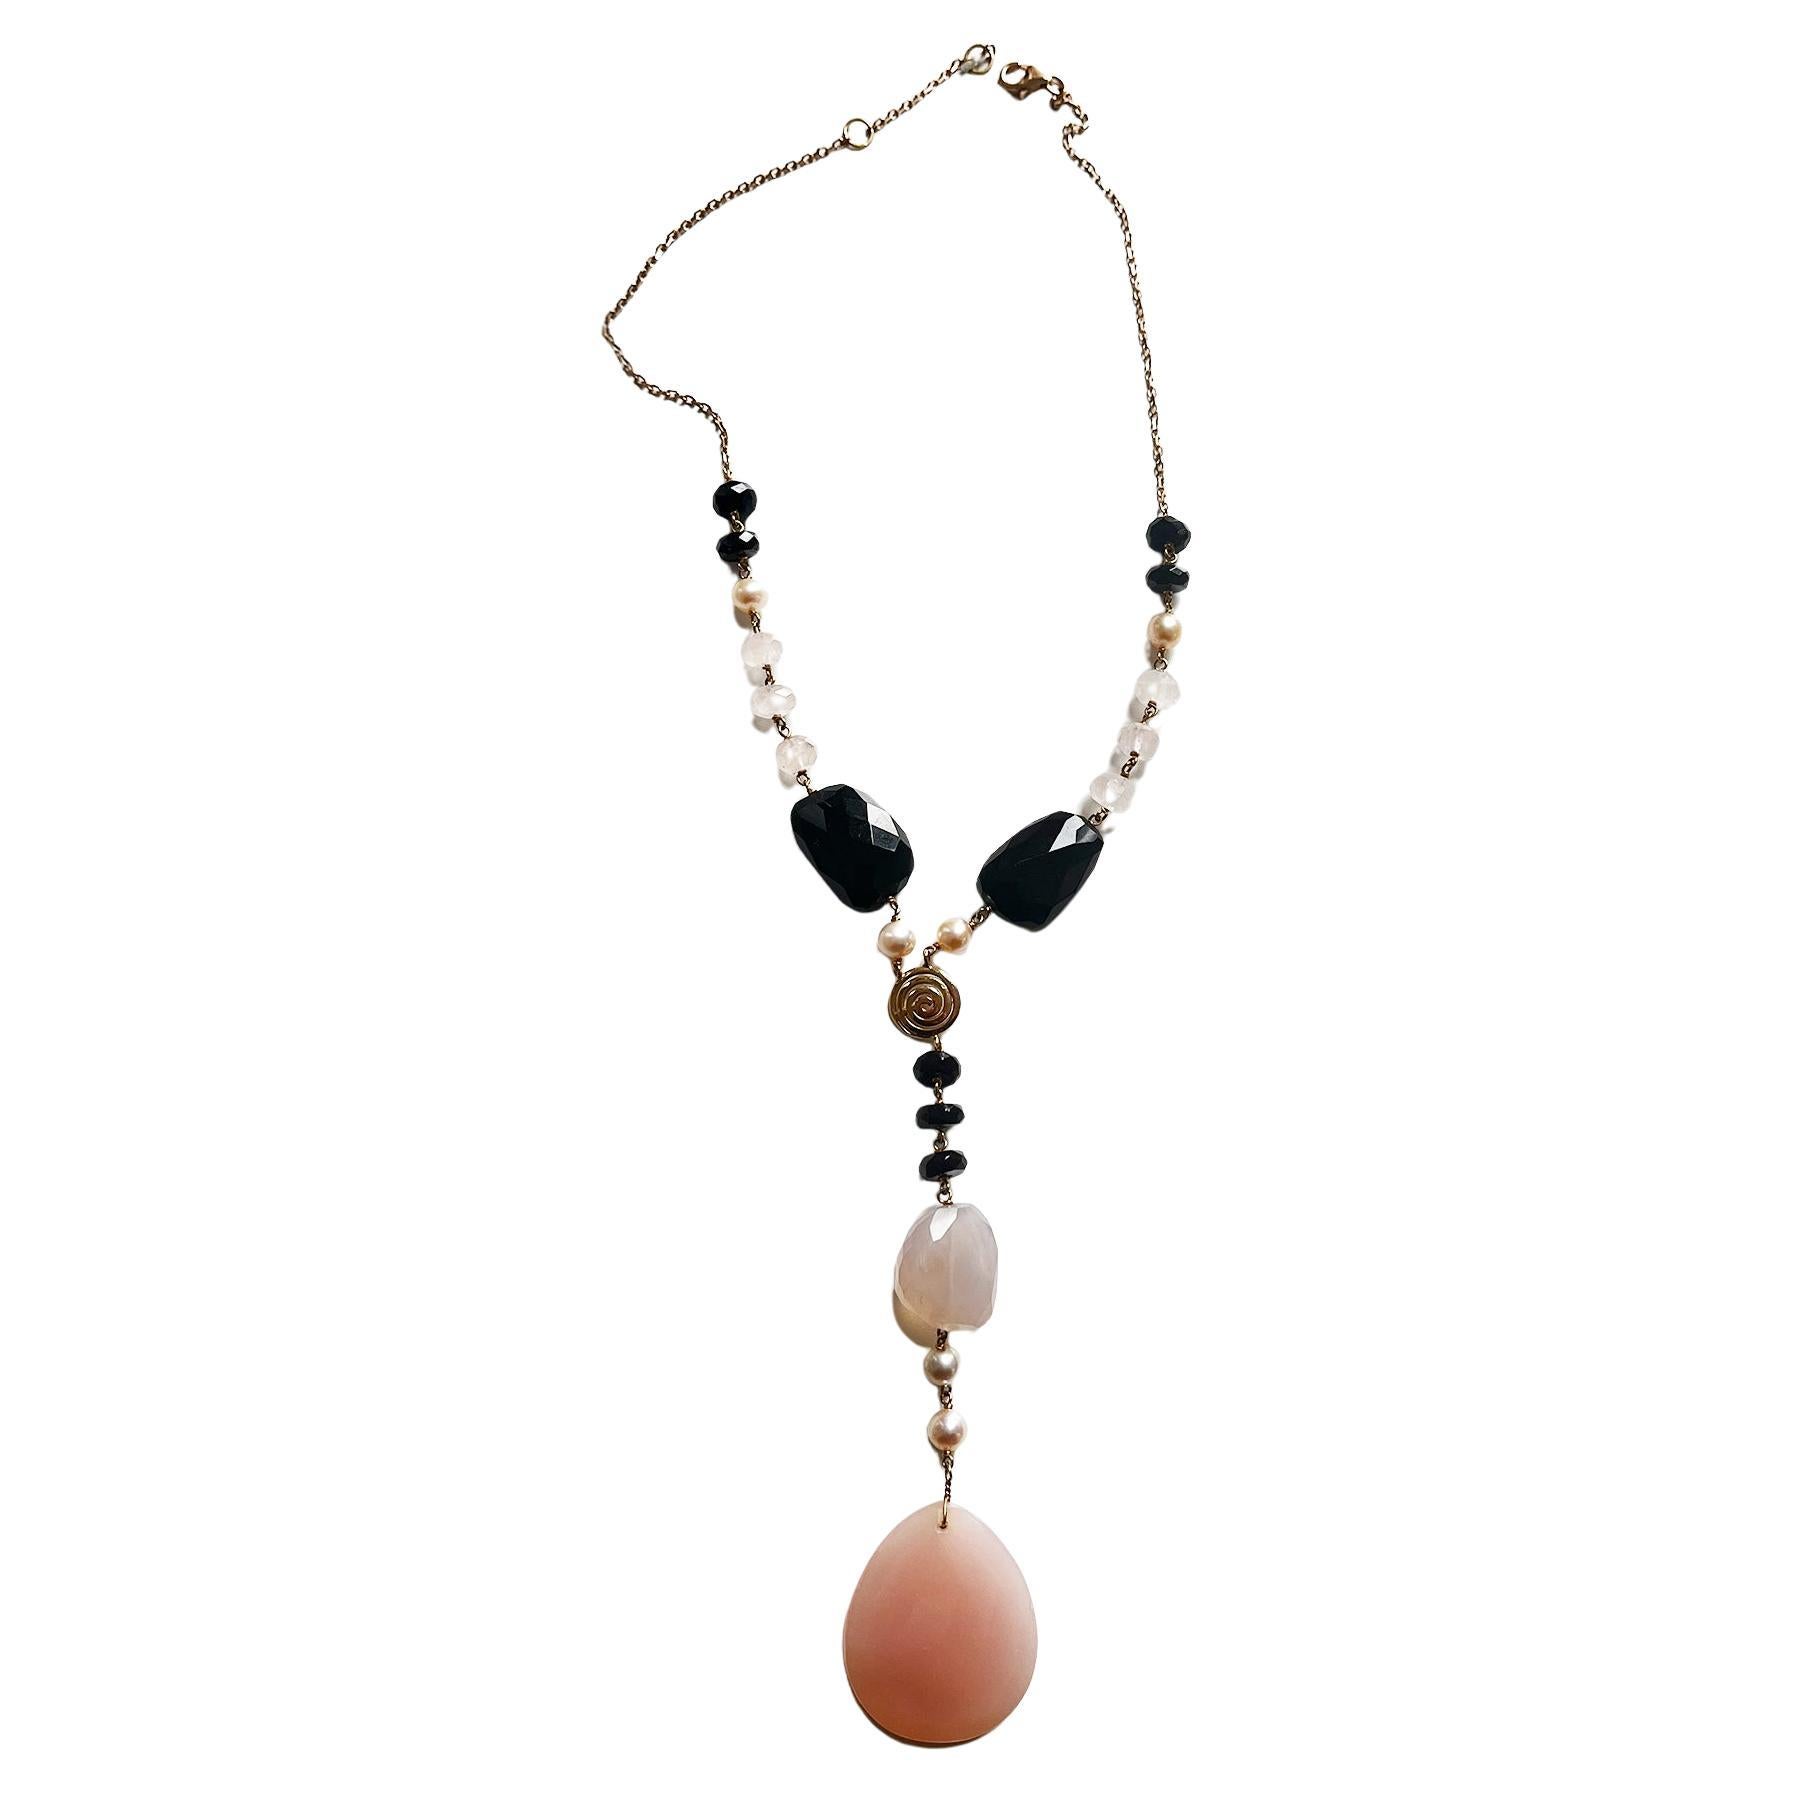 18KTrose gold Lariat necklace w. Onyx, pearls, Pink Chalcedony and pink quartzes